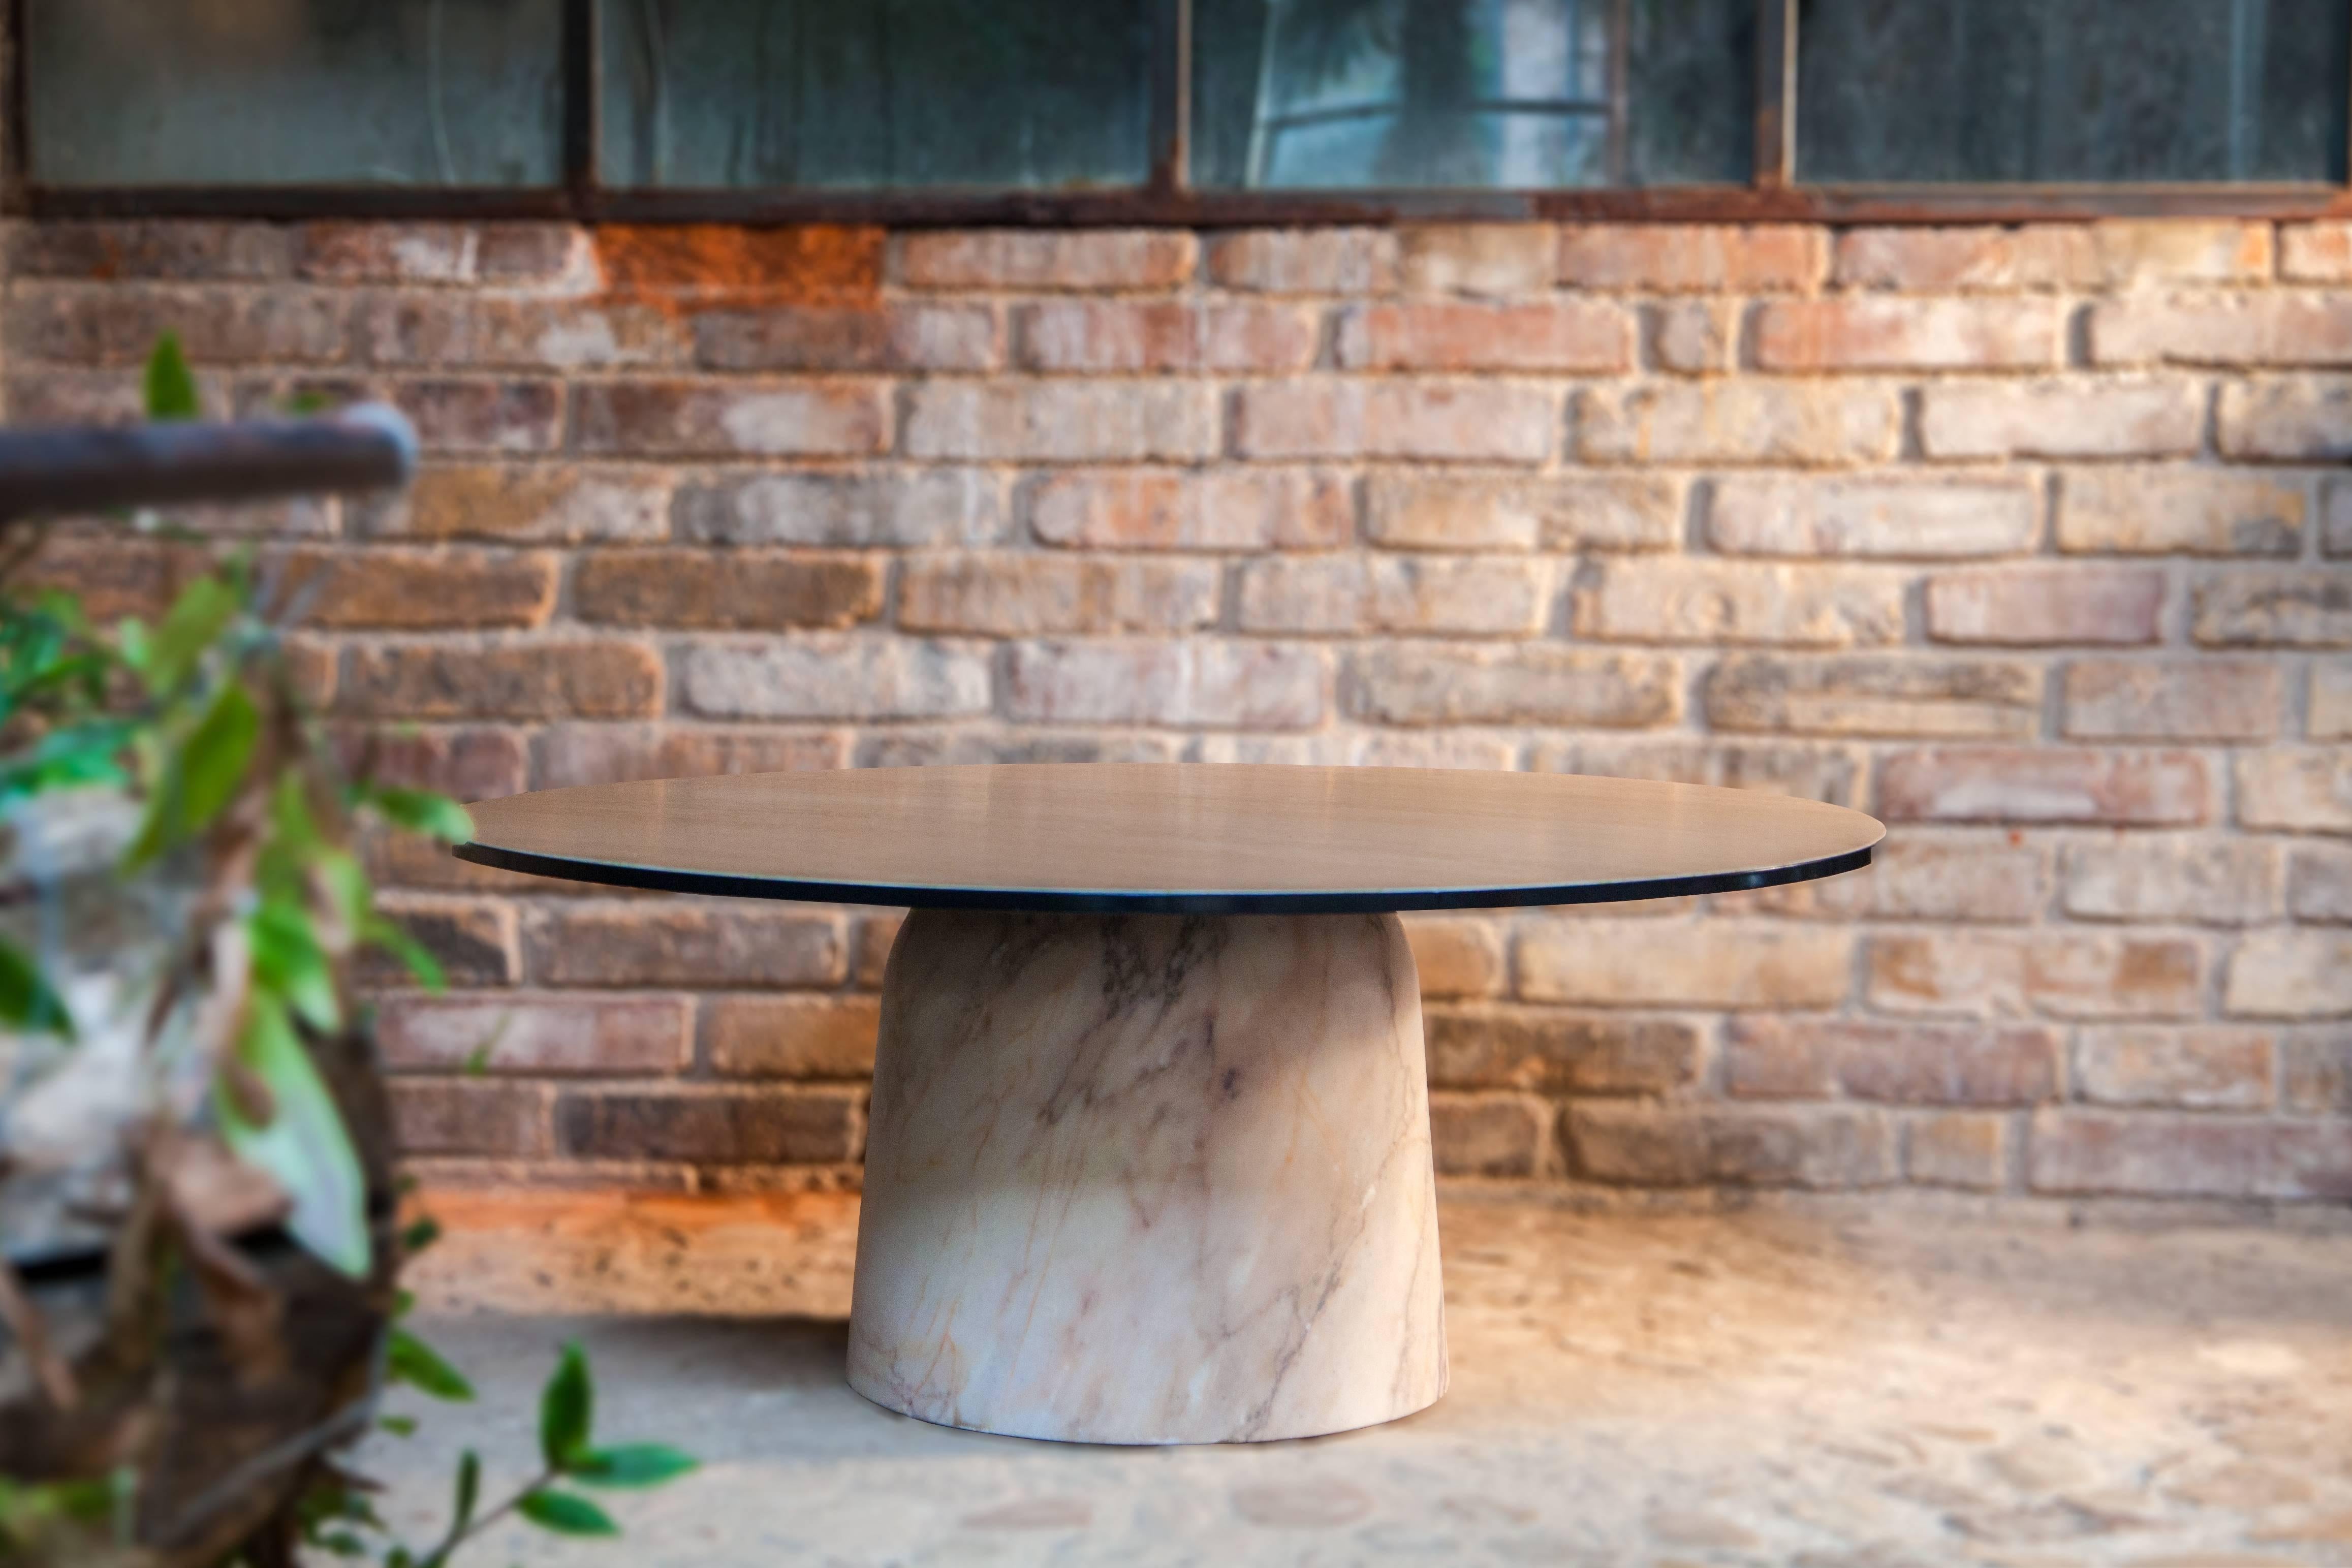 Simple elegant modern design with a sturdy unique marble leg which allows the tabletop to be disconnected from the floor to create the feeling of floating. The marble leg and the oak tabletop are both sculpted by a turner. Their invisible assembly